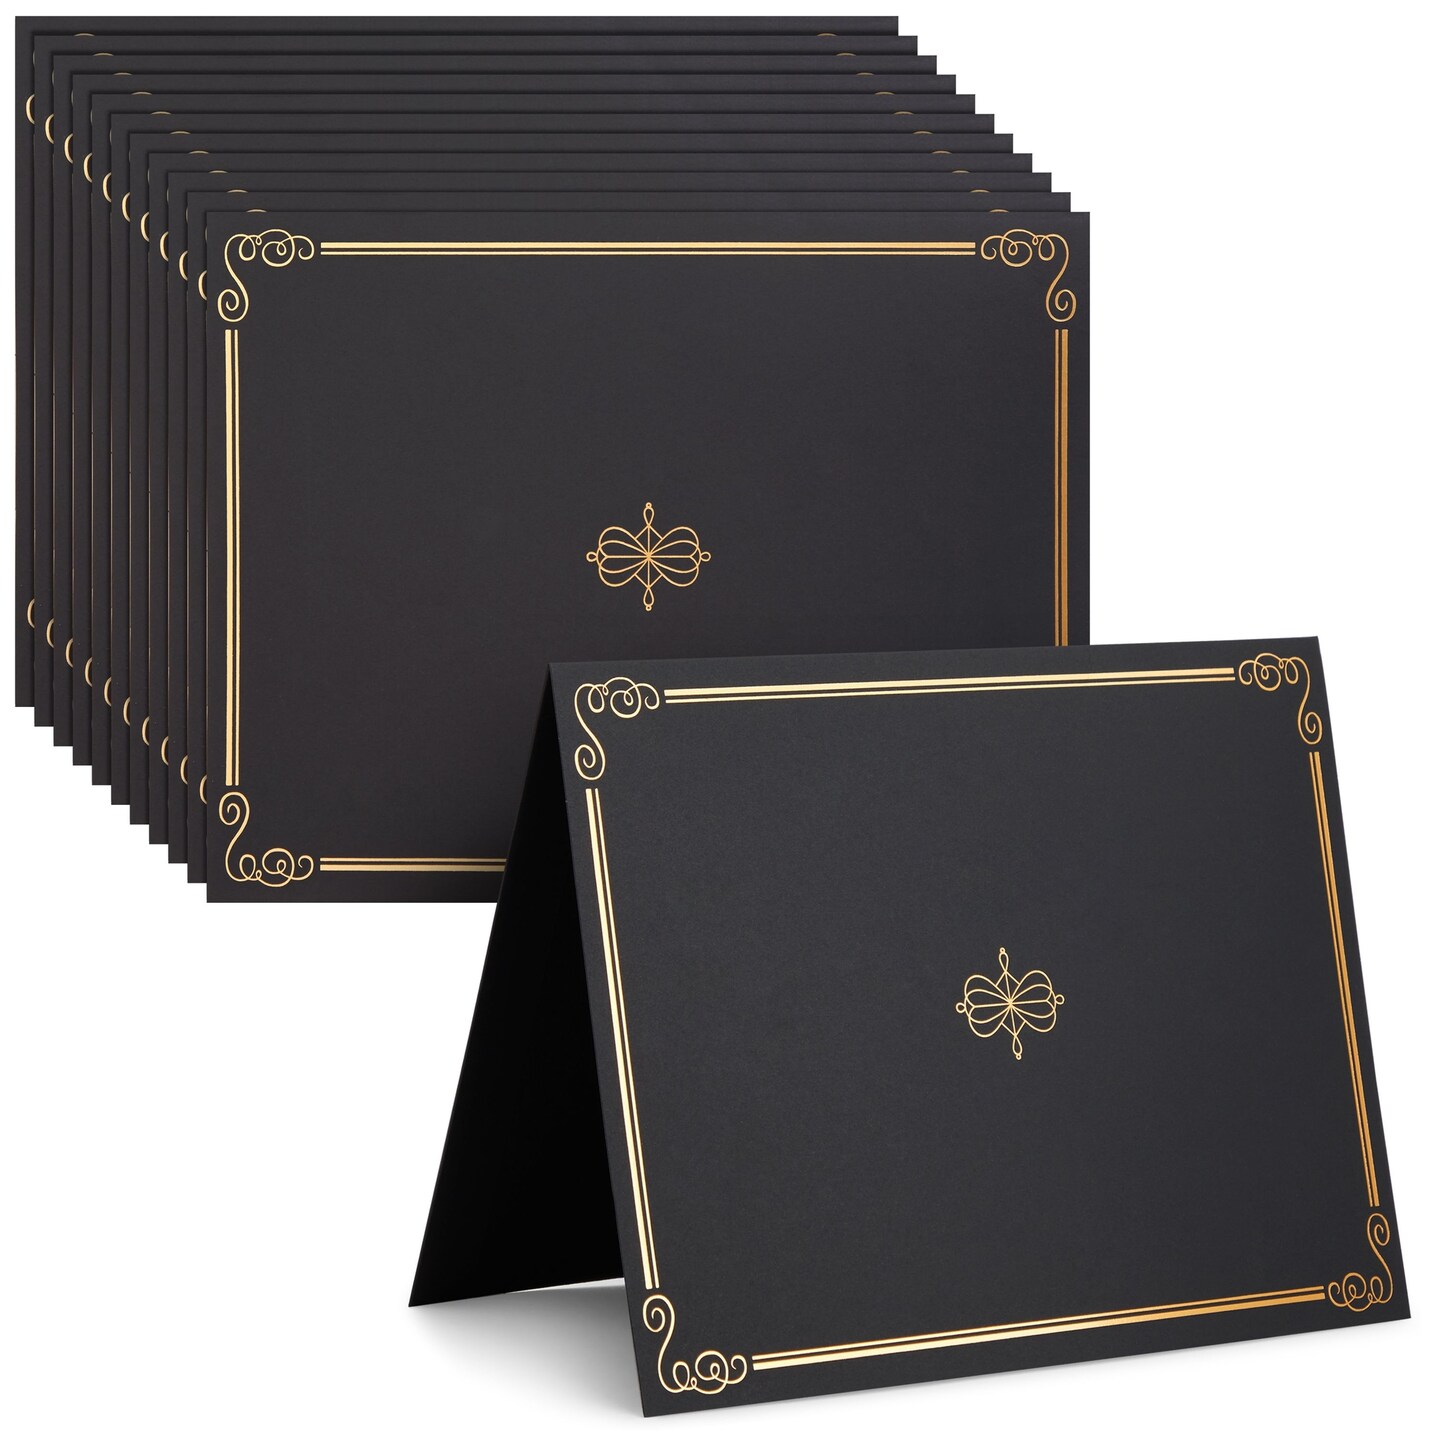 24 Pack Black Certificate Holders with Gold Foil Design for Letter-Size 8.5 x 11 Documents, Graduation Awards, Diploma Cover (11.2 x 8.7 In)